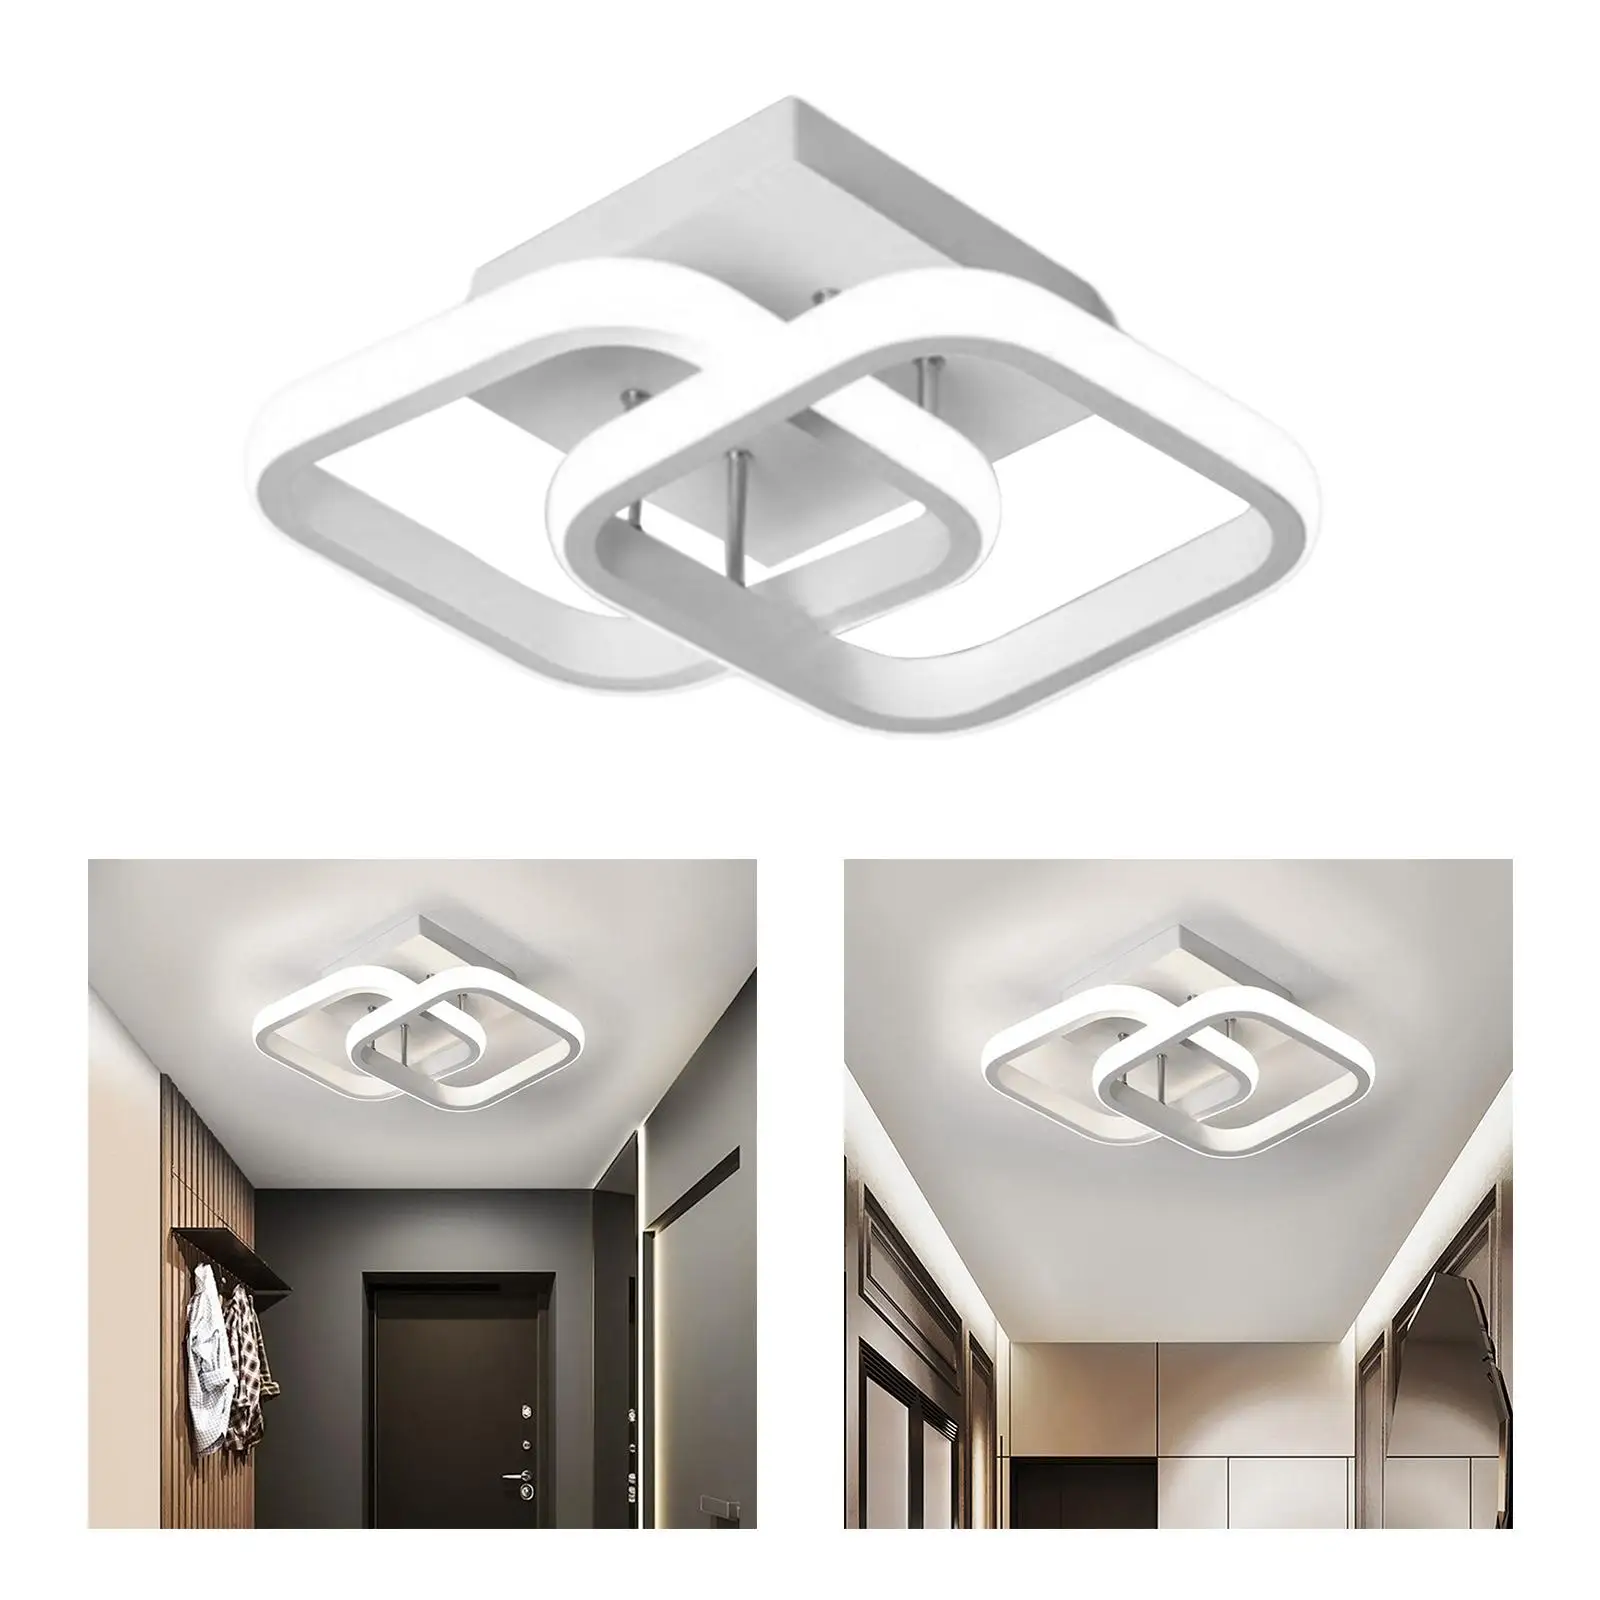 Ceiling Light LED Light Easy to Installation Ceiling Lamp for Living Room Bedroom Kitchen Balcony Dining Room Apartment Decors